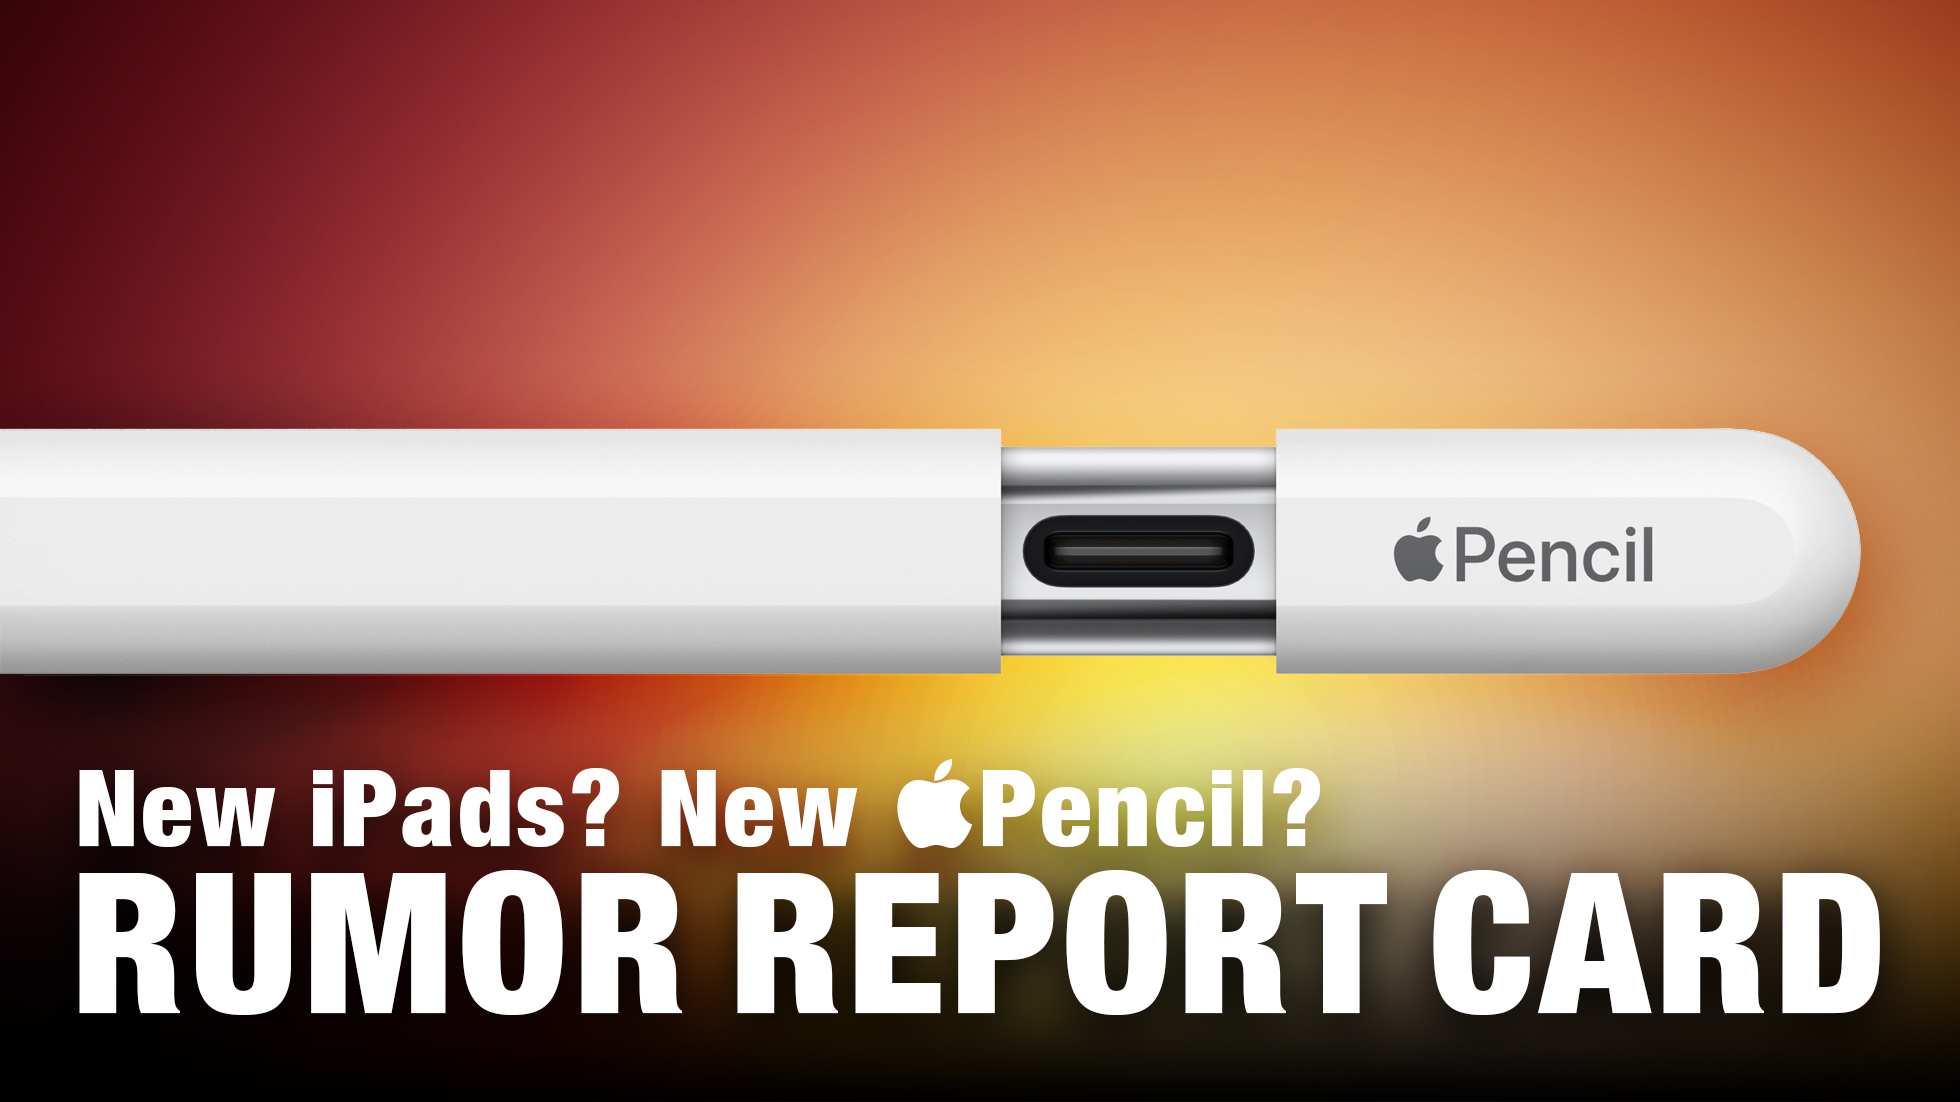 Rumor Report Card: New Apple Pencil Announced Instead of New iPads